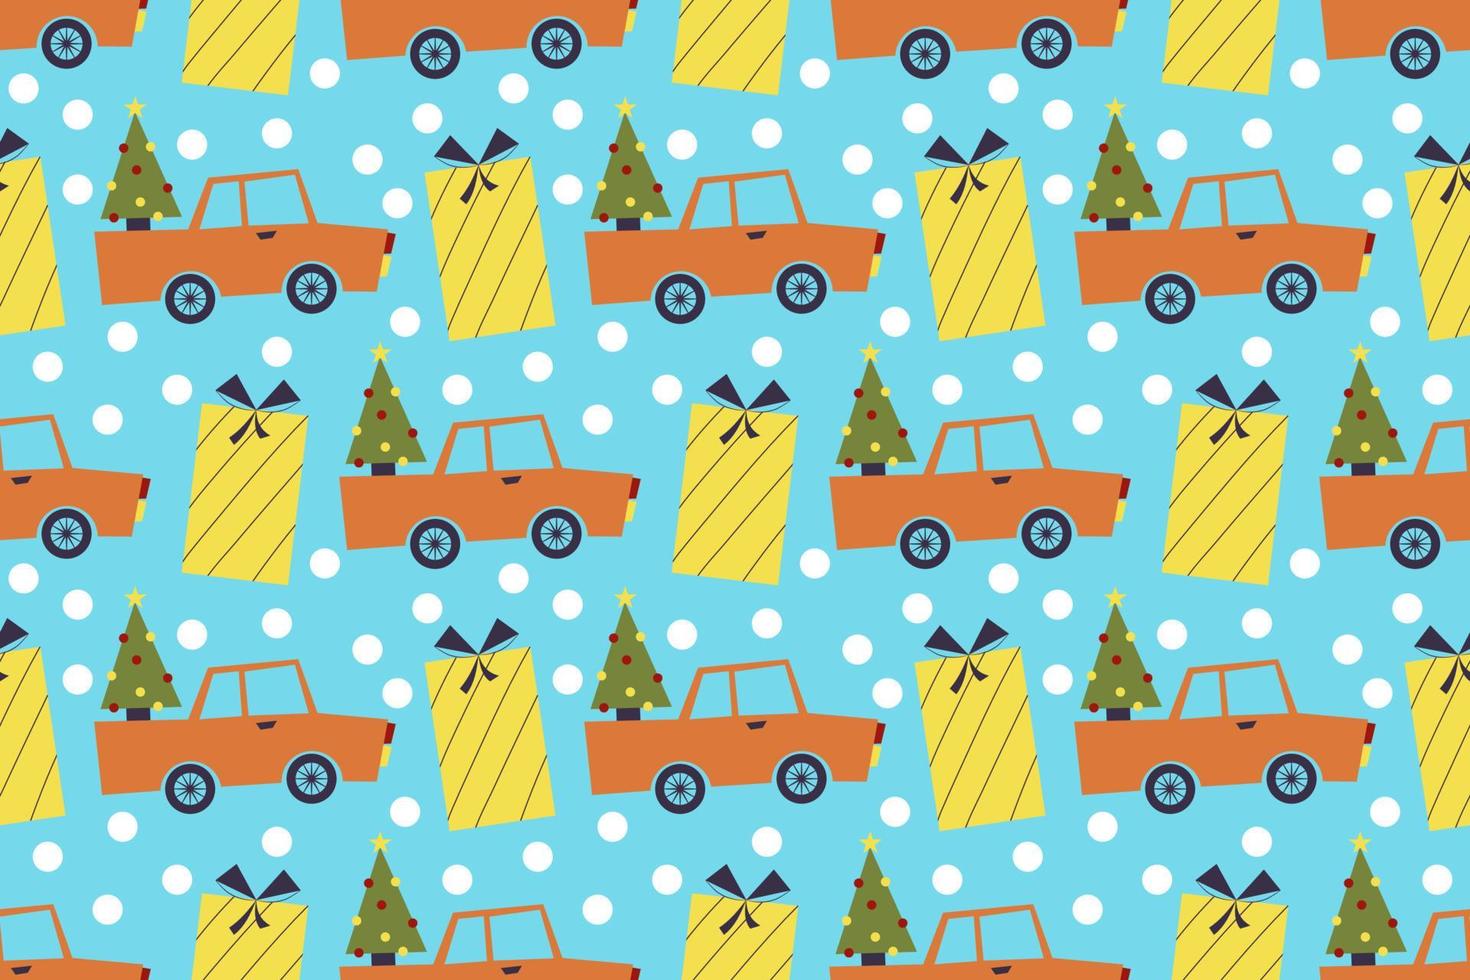 Seamless pattern for merry Christmas with car, Christmas tree in the trunk and gift box. Vector illustration in a flat style. Festive winter pattern with snowflakes.